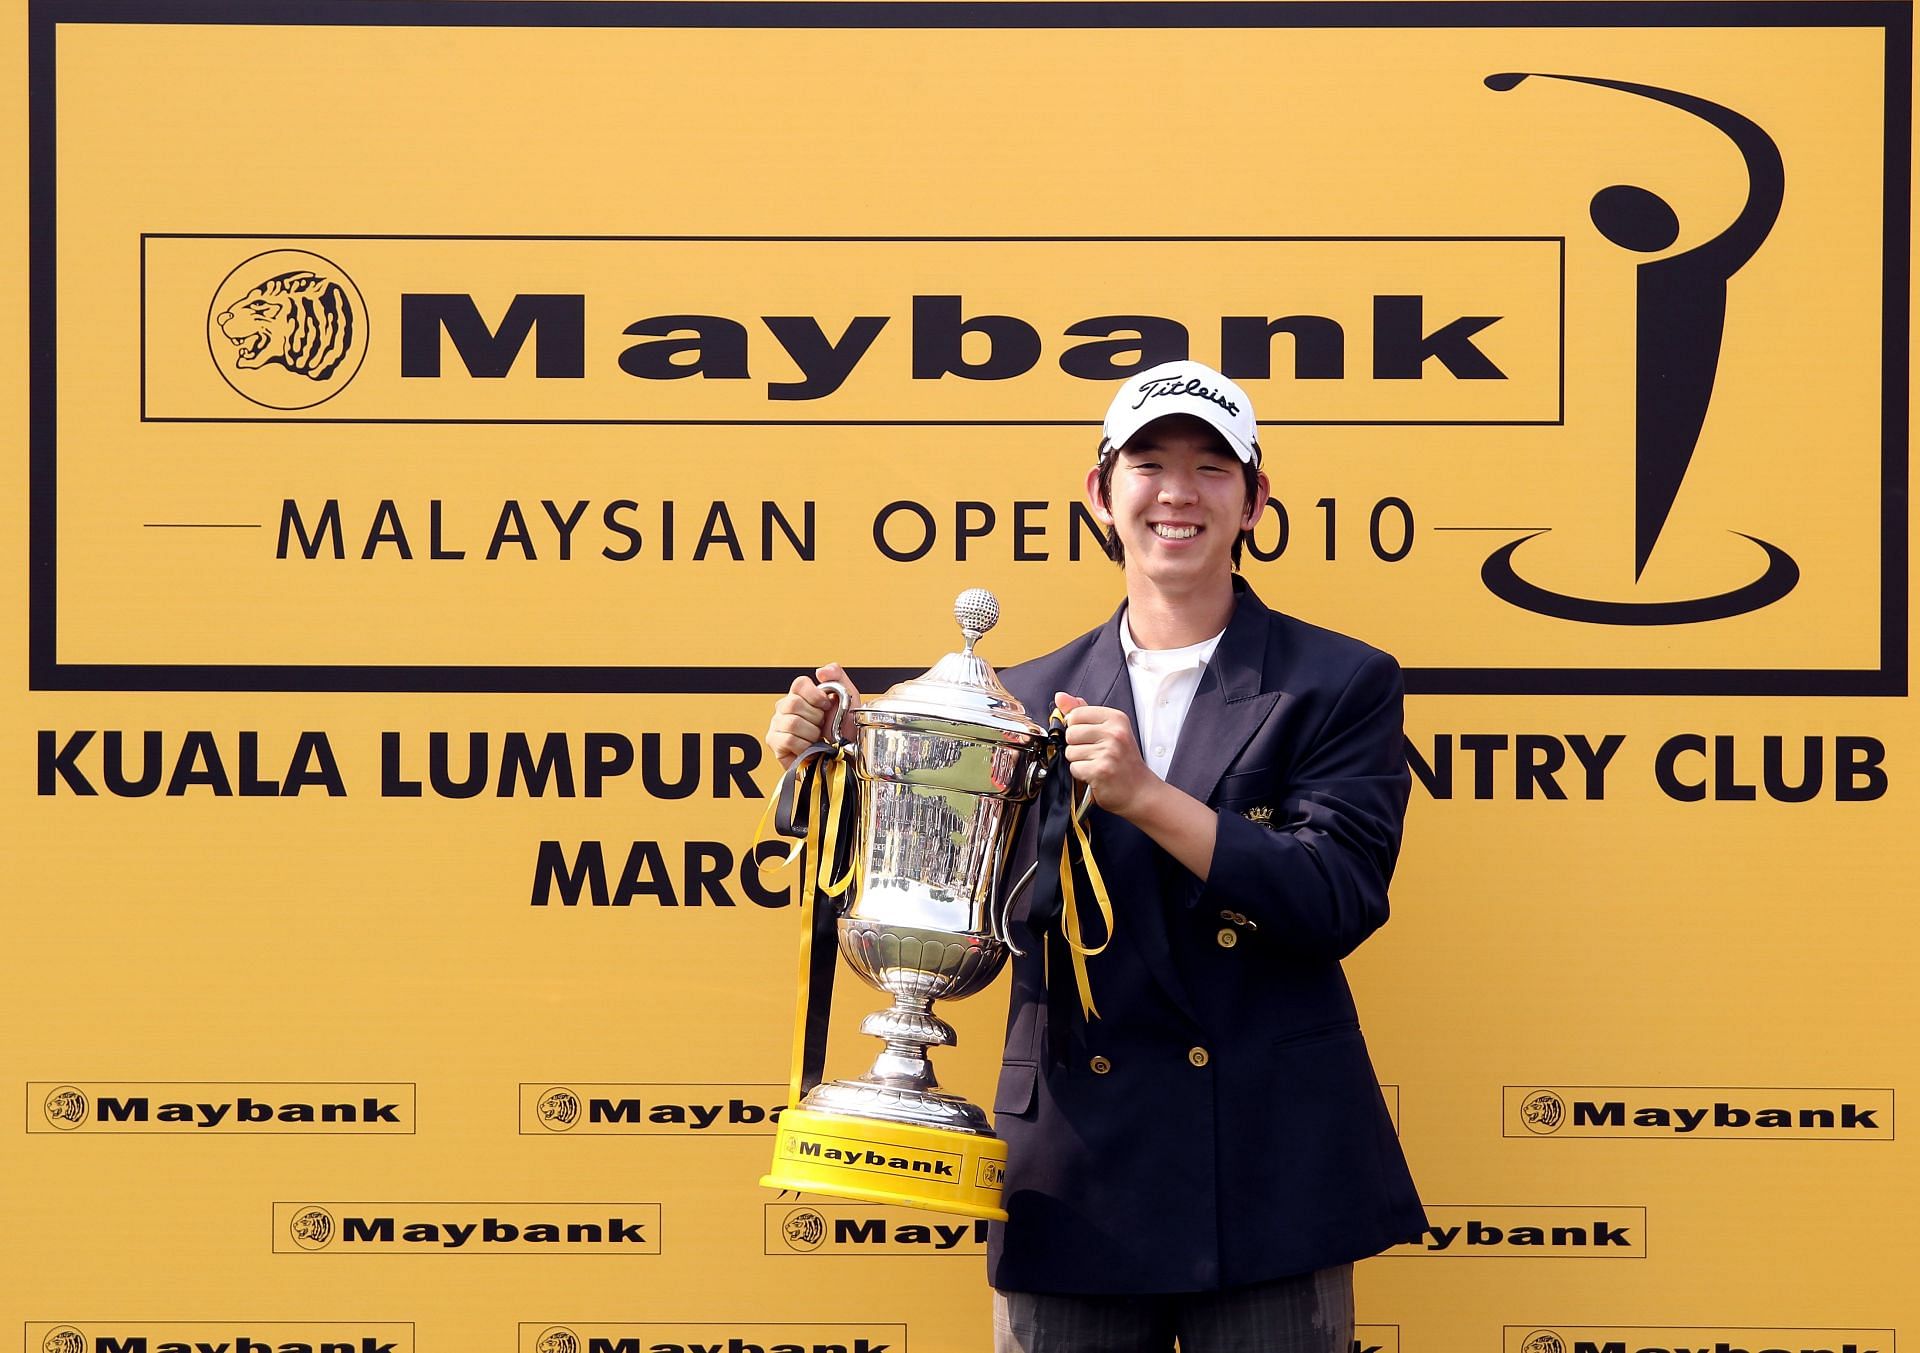 The Malaysian Open is back